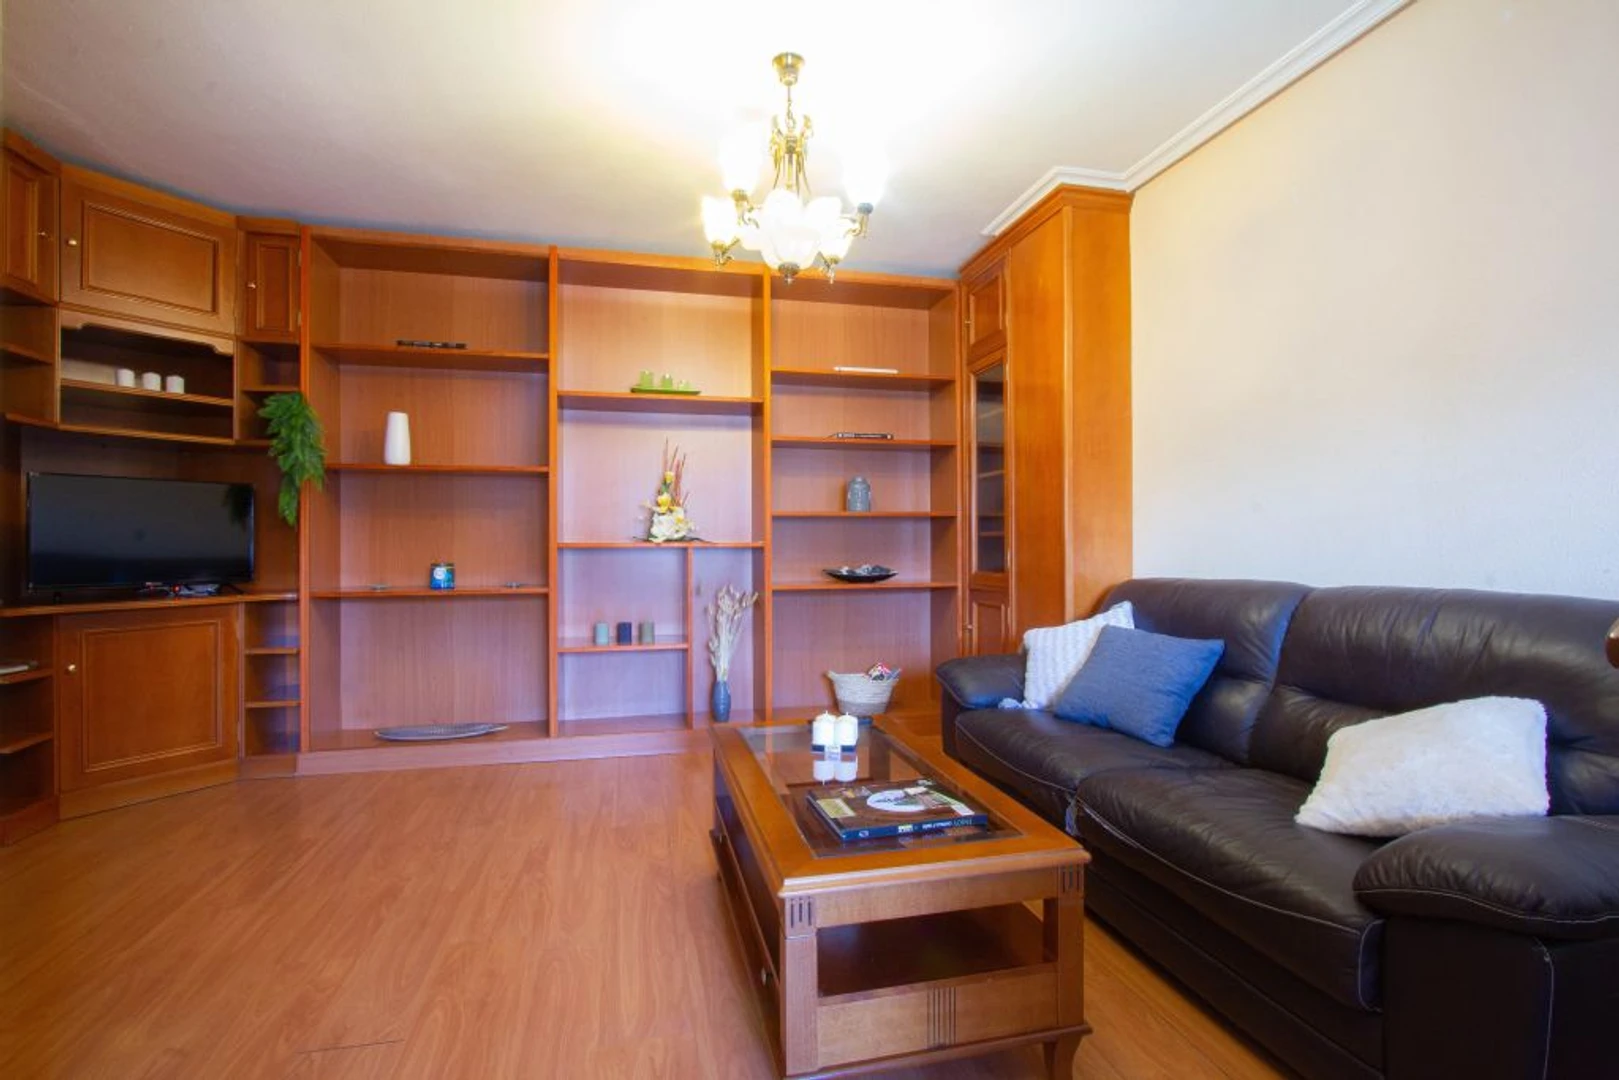 Accommodation with 3 bedrooms in Salamanca